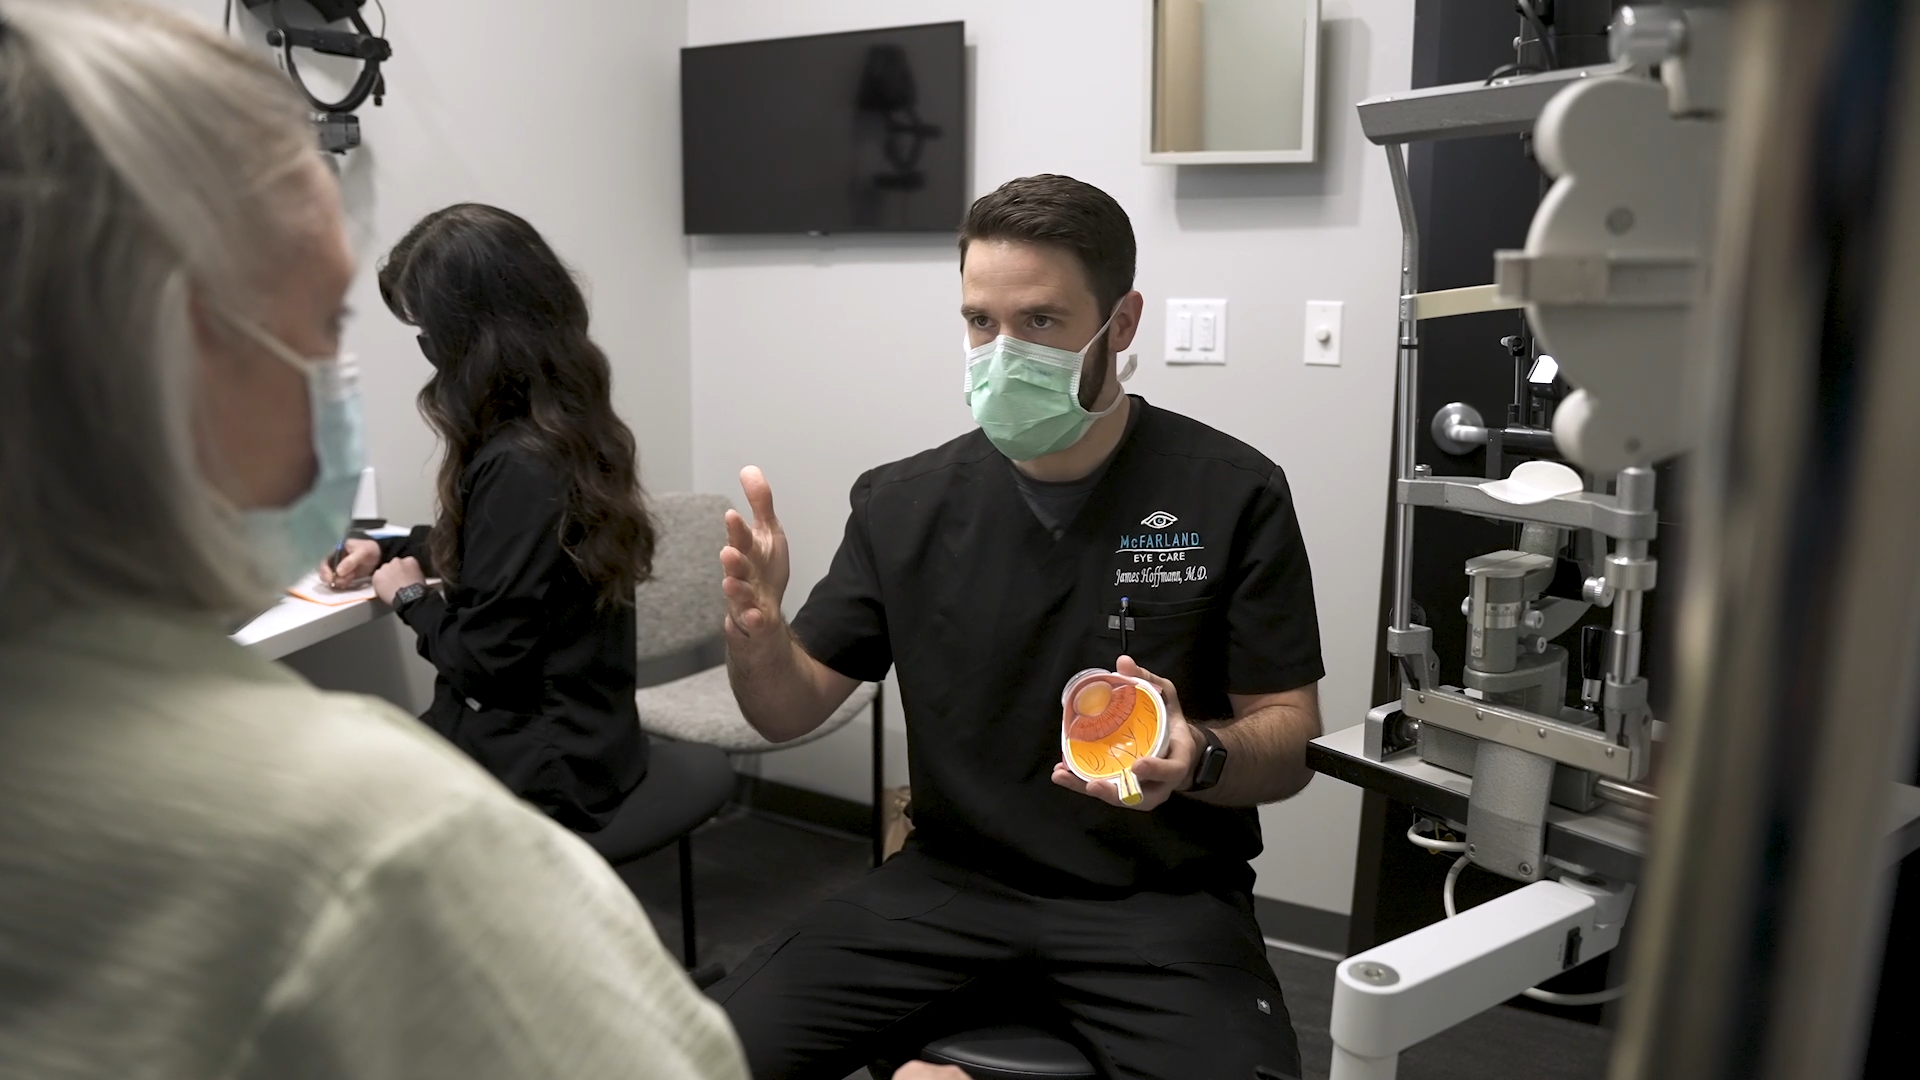 Cataract evaluation with Dr. James Hoffmann at McFarland Eye Care in Little Rock, AR